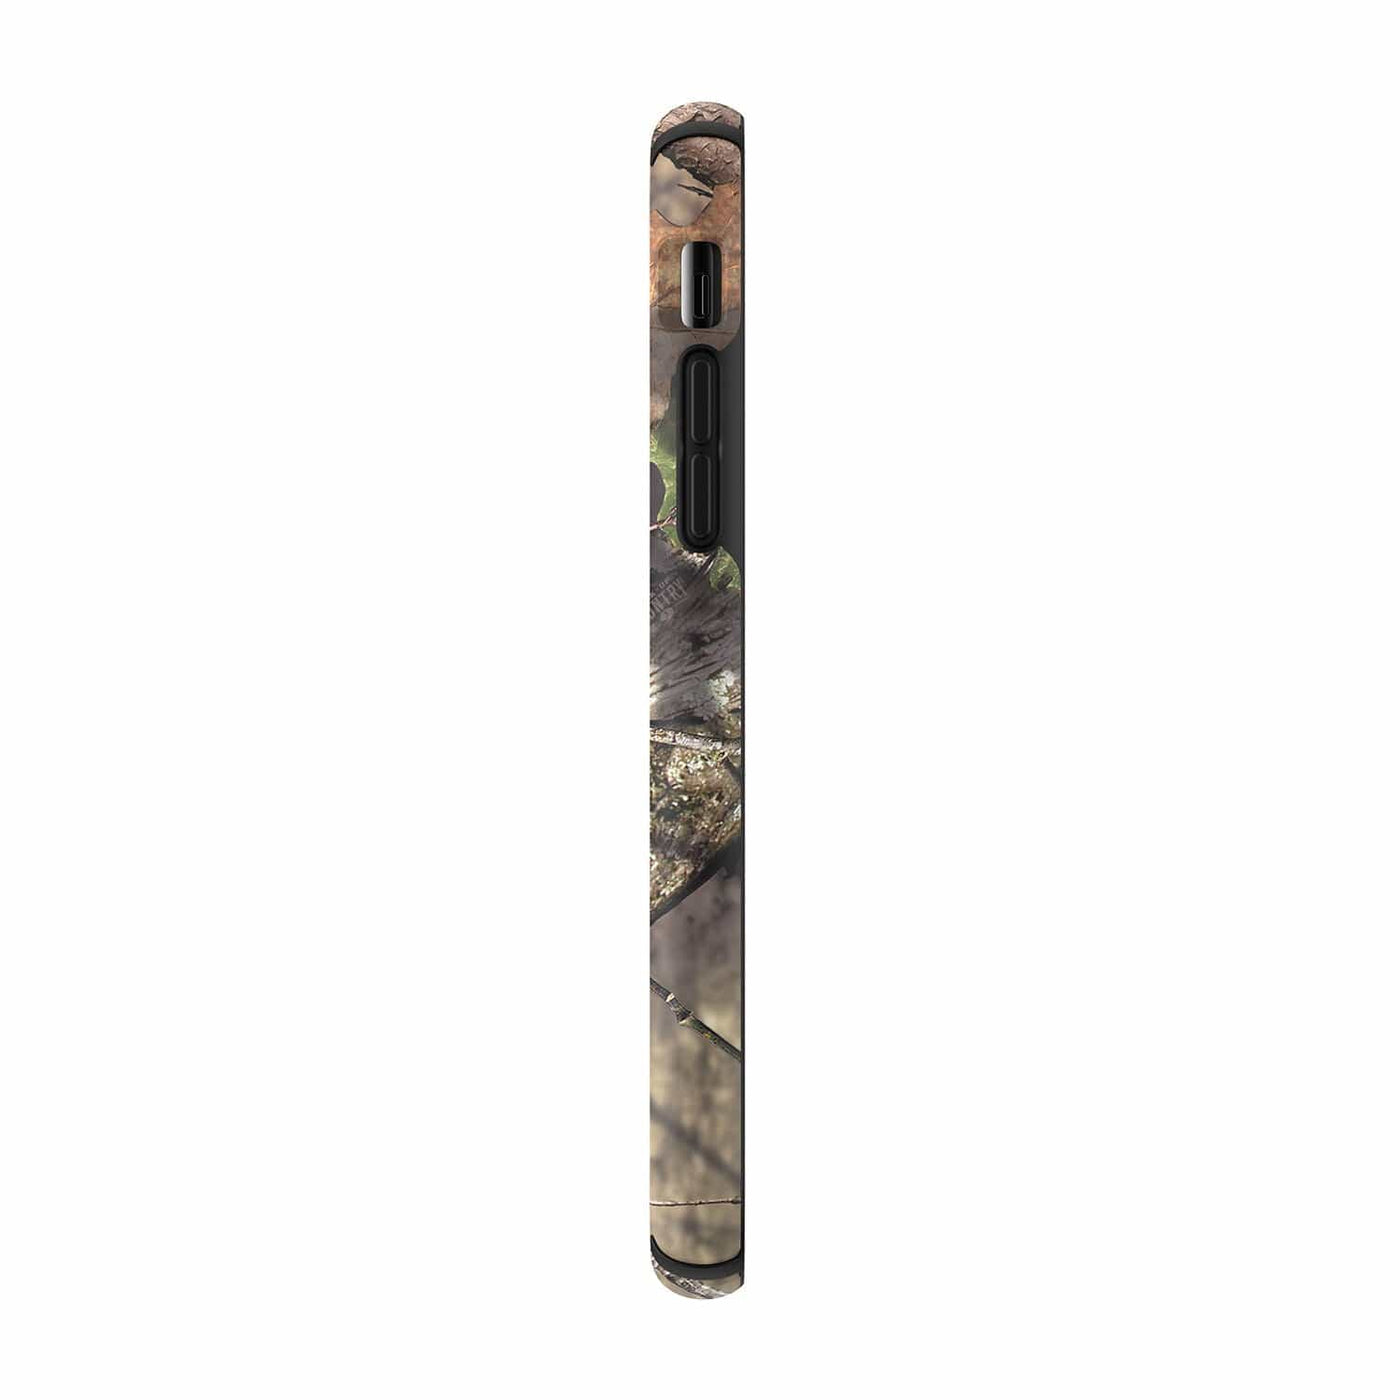 Speck Presidio Inked Mossy Oak Edition iPhone 11 Cases Break-Up Pink